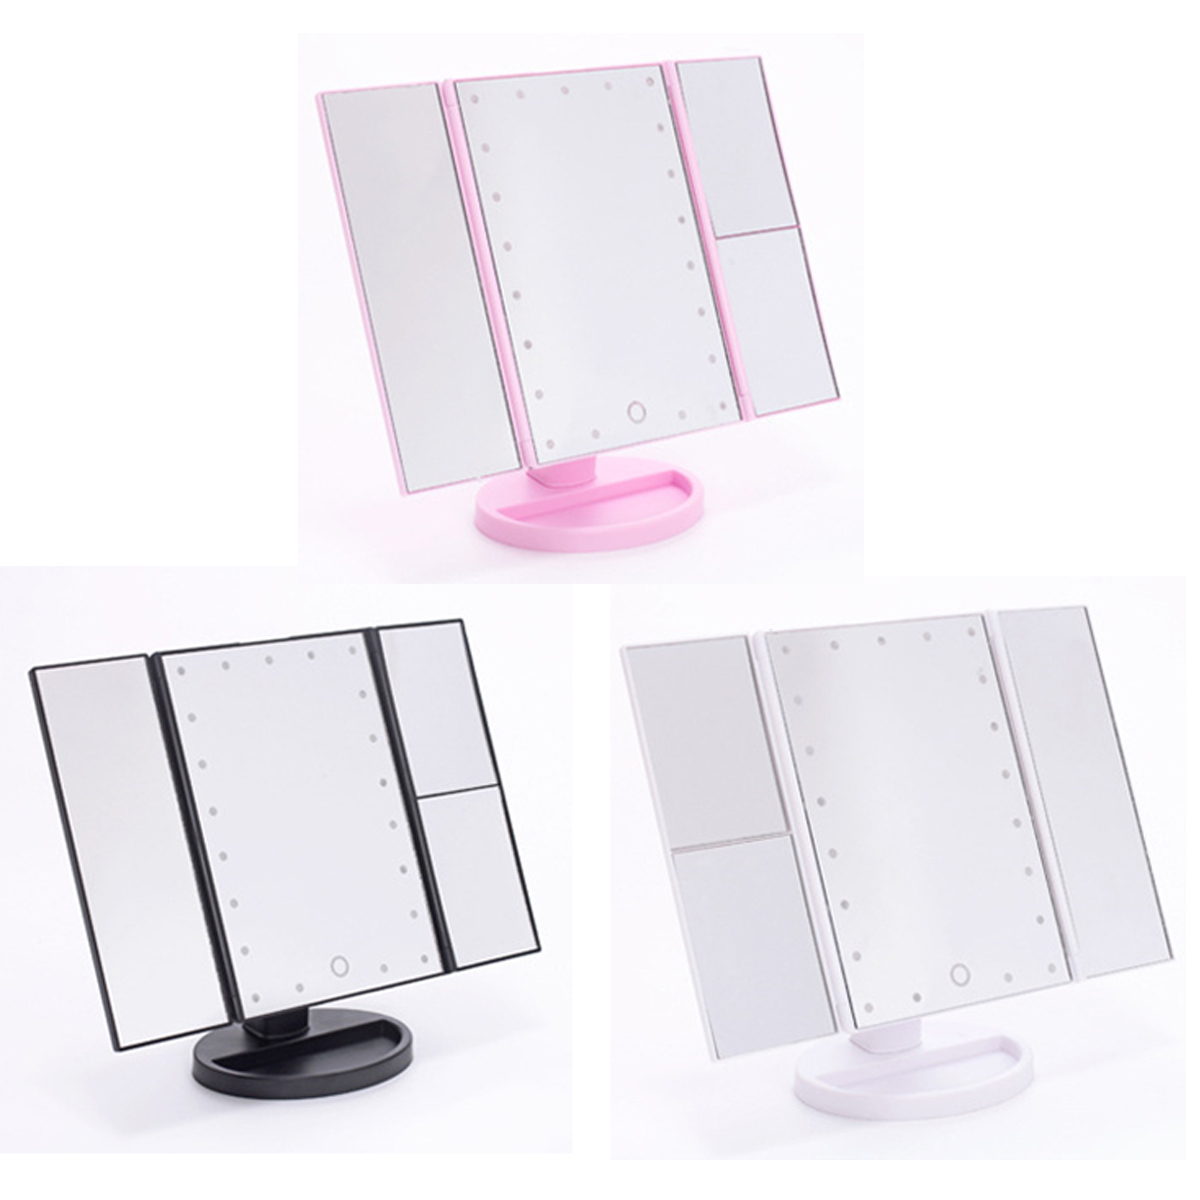 22LED-Tri-Fold-Touch-Screen-Makeup-Mirror-Table-Cosmetic-Vanity-Light-Mirror-1943281-1